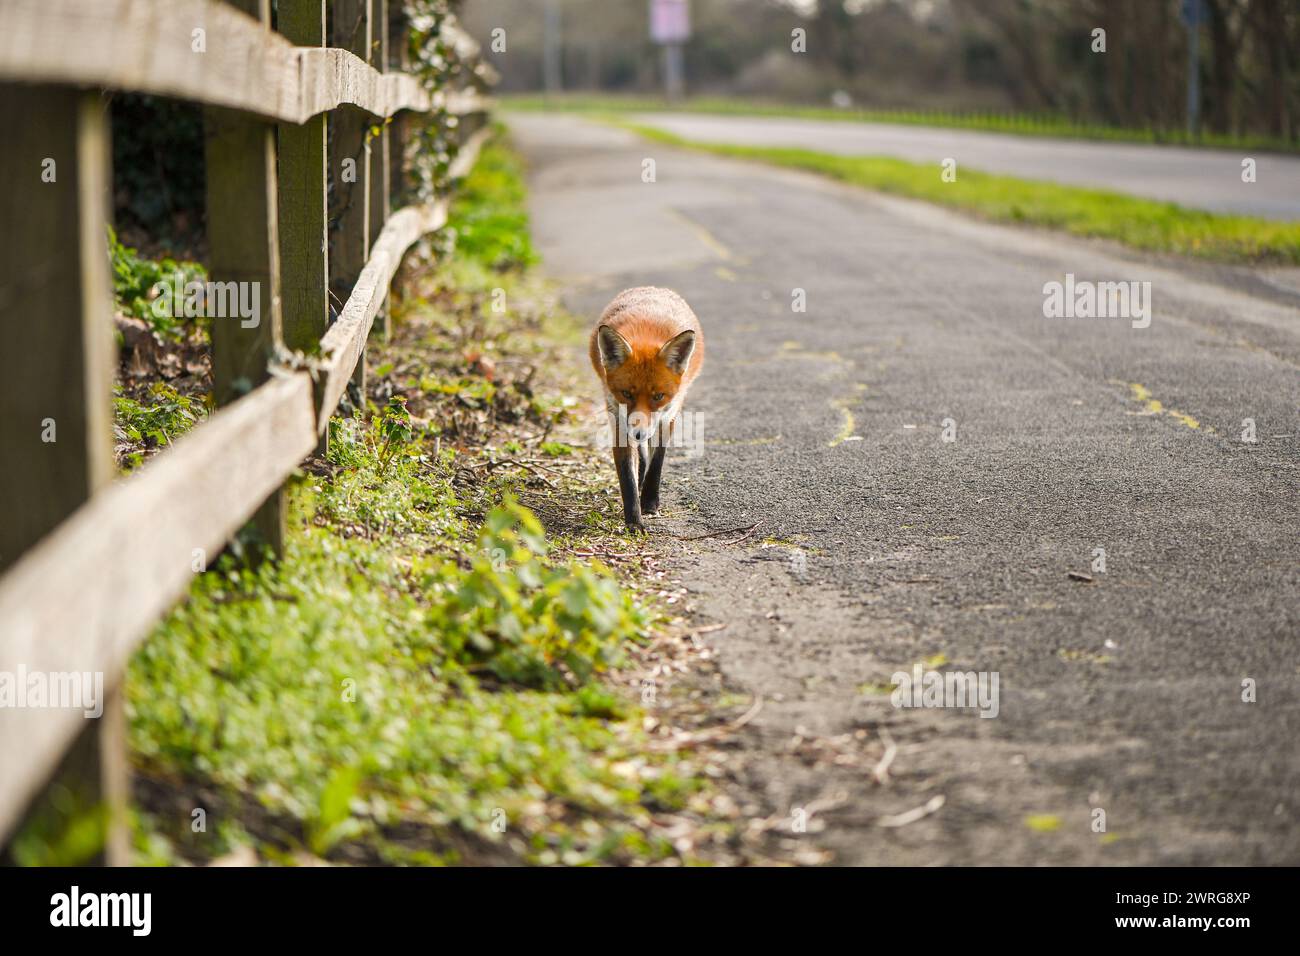 An urban Red fox casually enjoying the sun at midday by the roadside, curious enough to approach the camera unworried by the photographers presence. Stock Photo